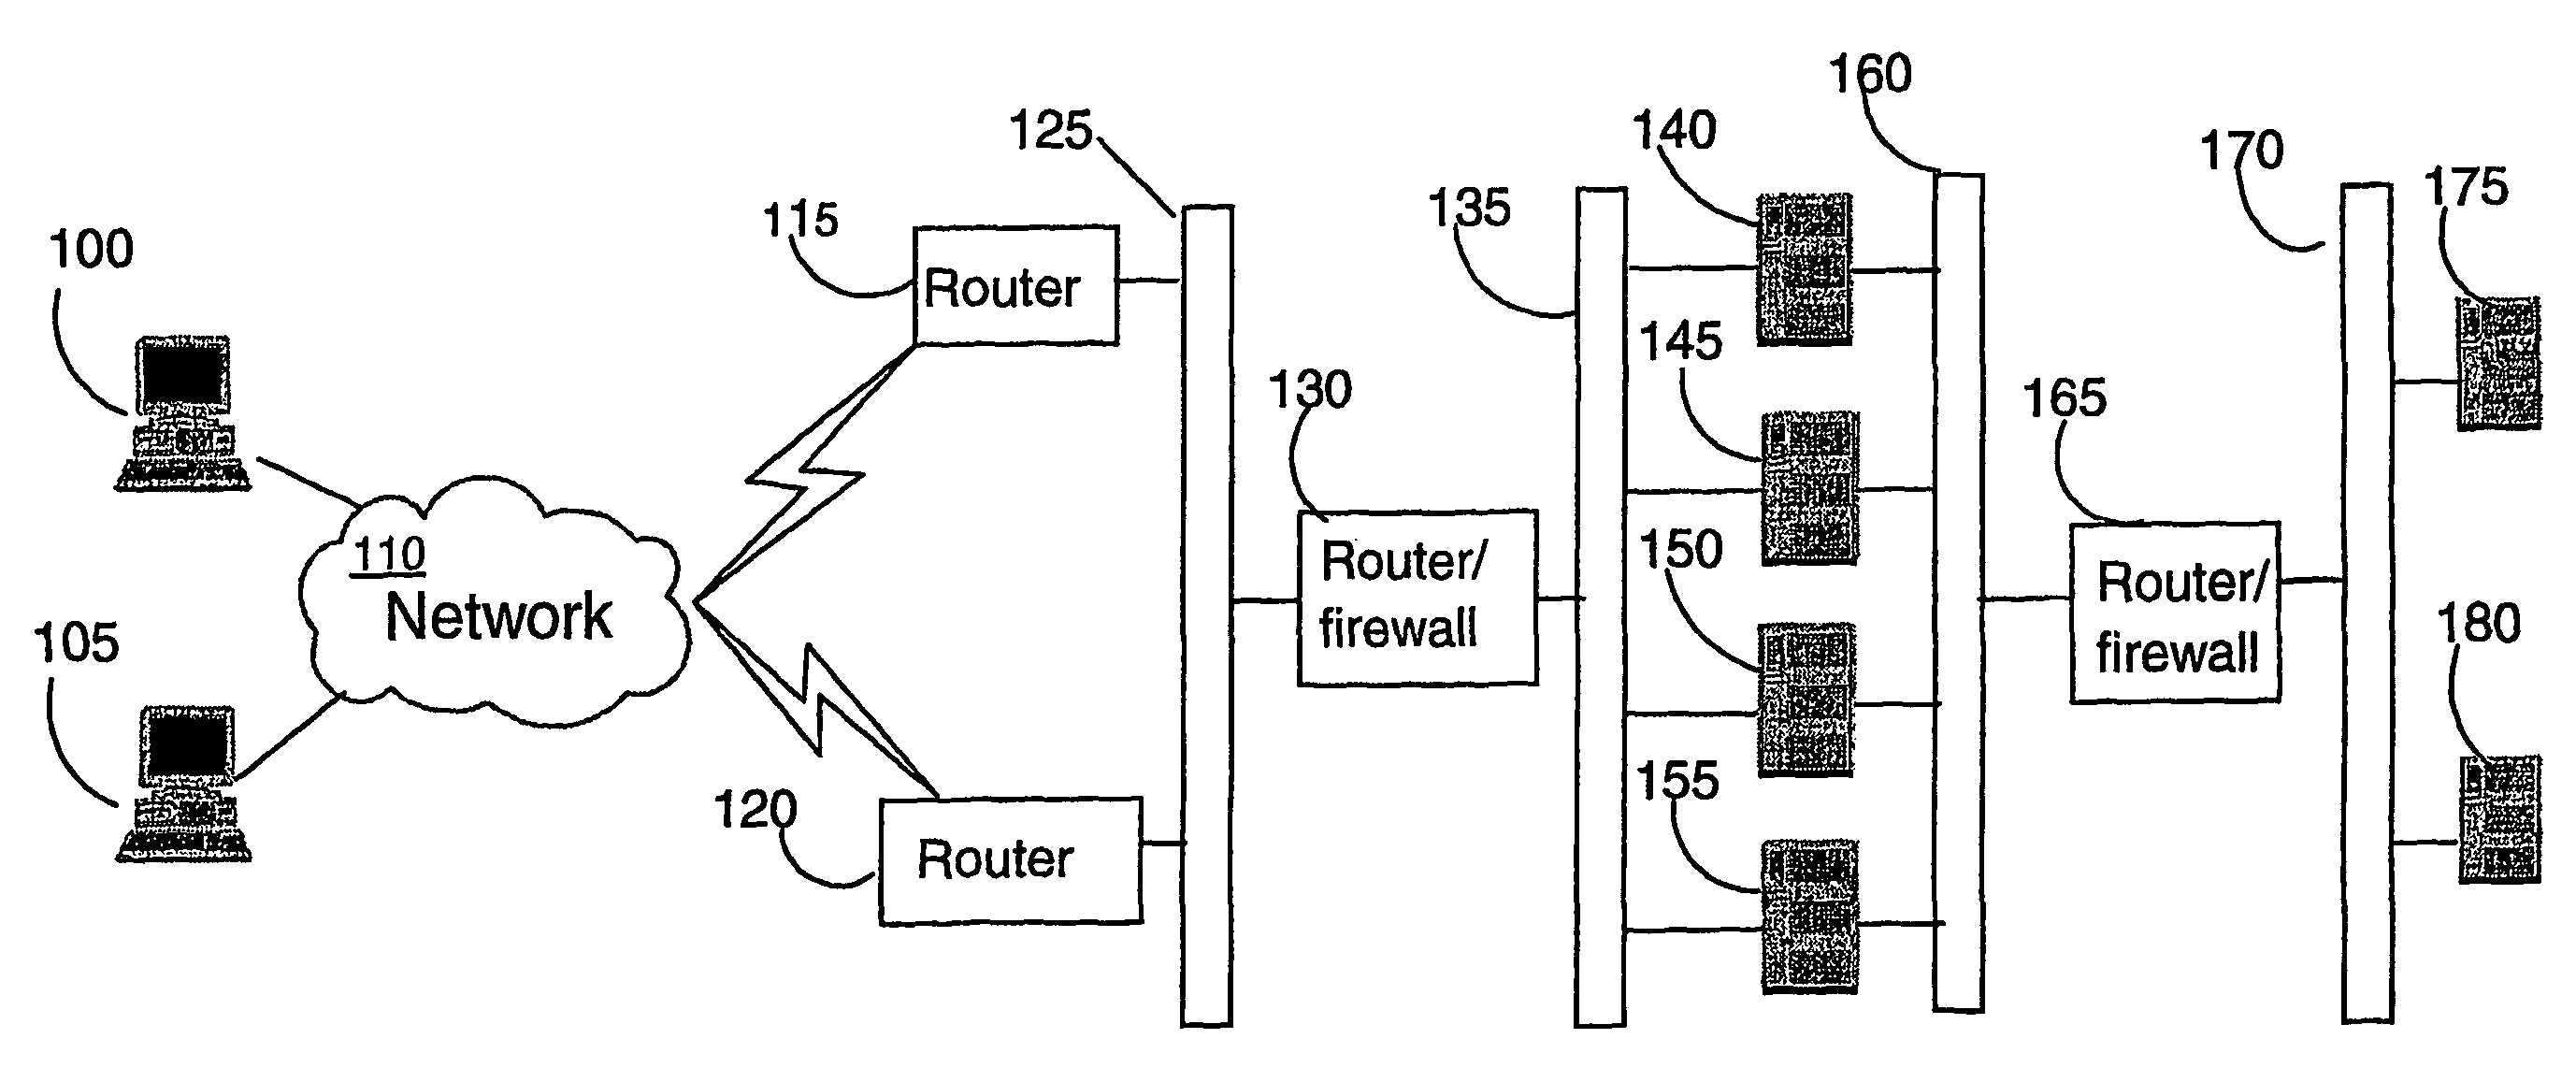 Remote dynamic configuration of a web server to facilitate capacity on demand